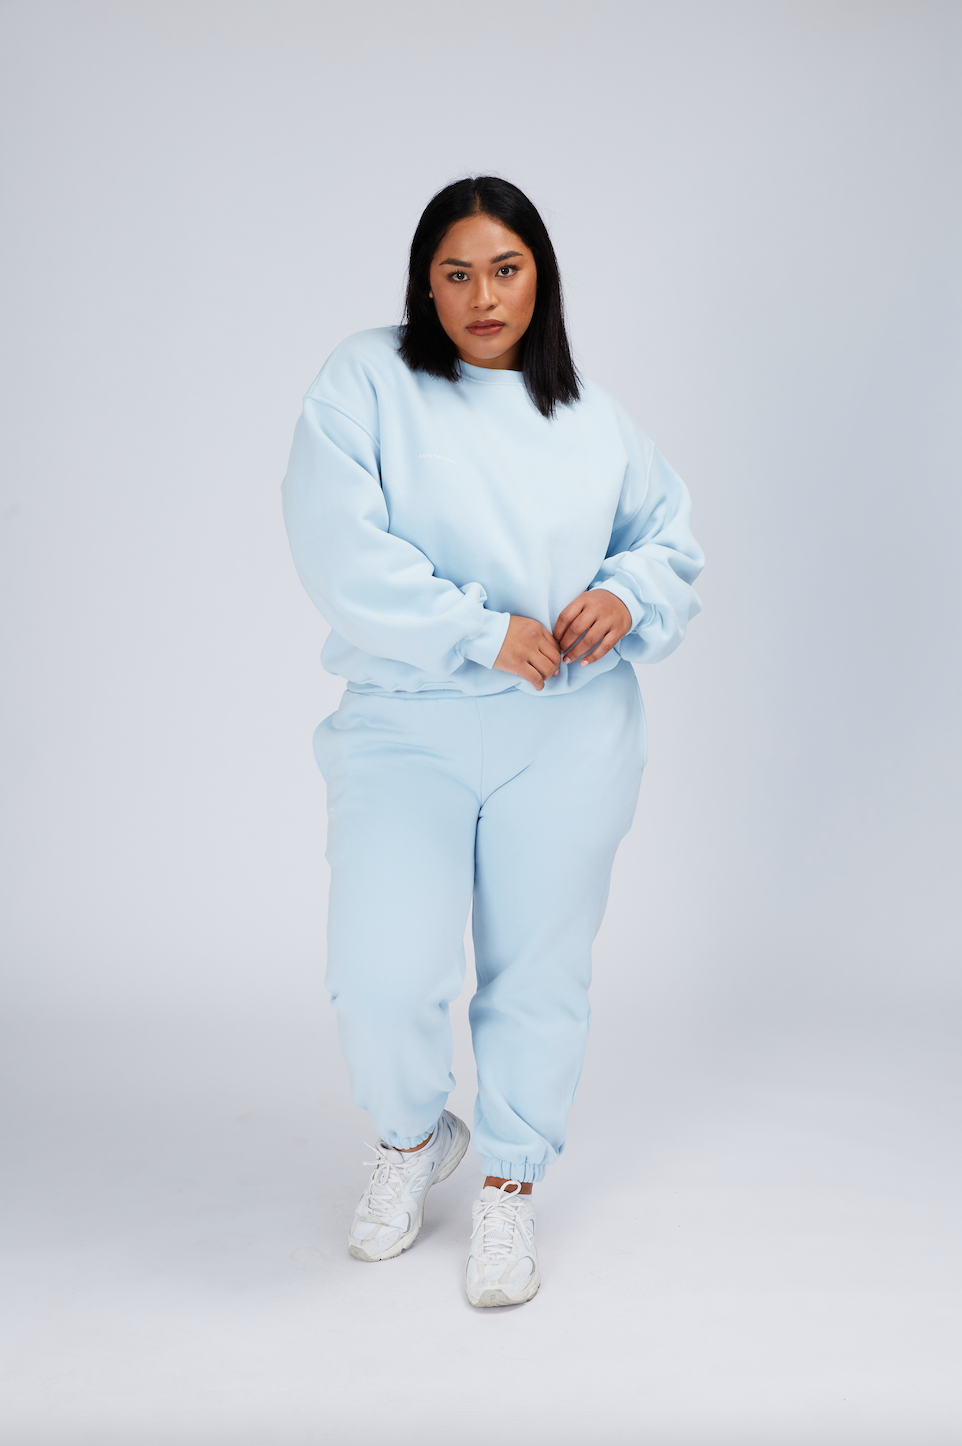 baby blue tracksuit pants - women’s jumper and tracksuit pants set - kate galliano activewear